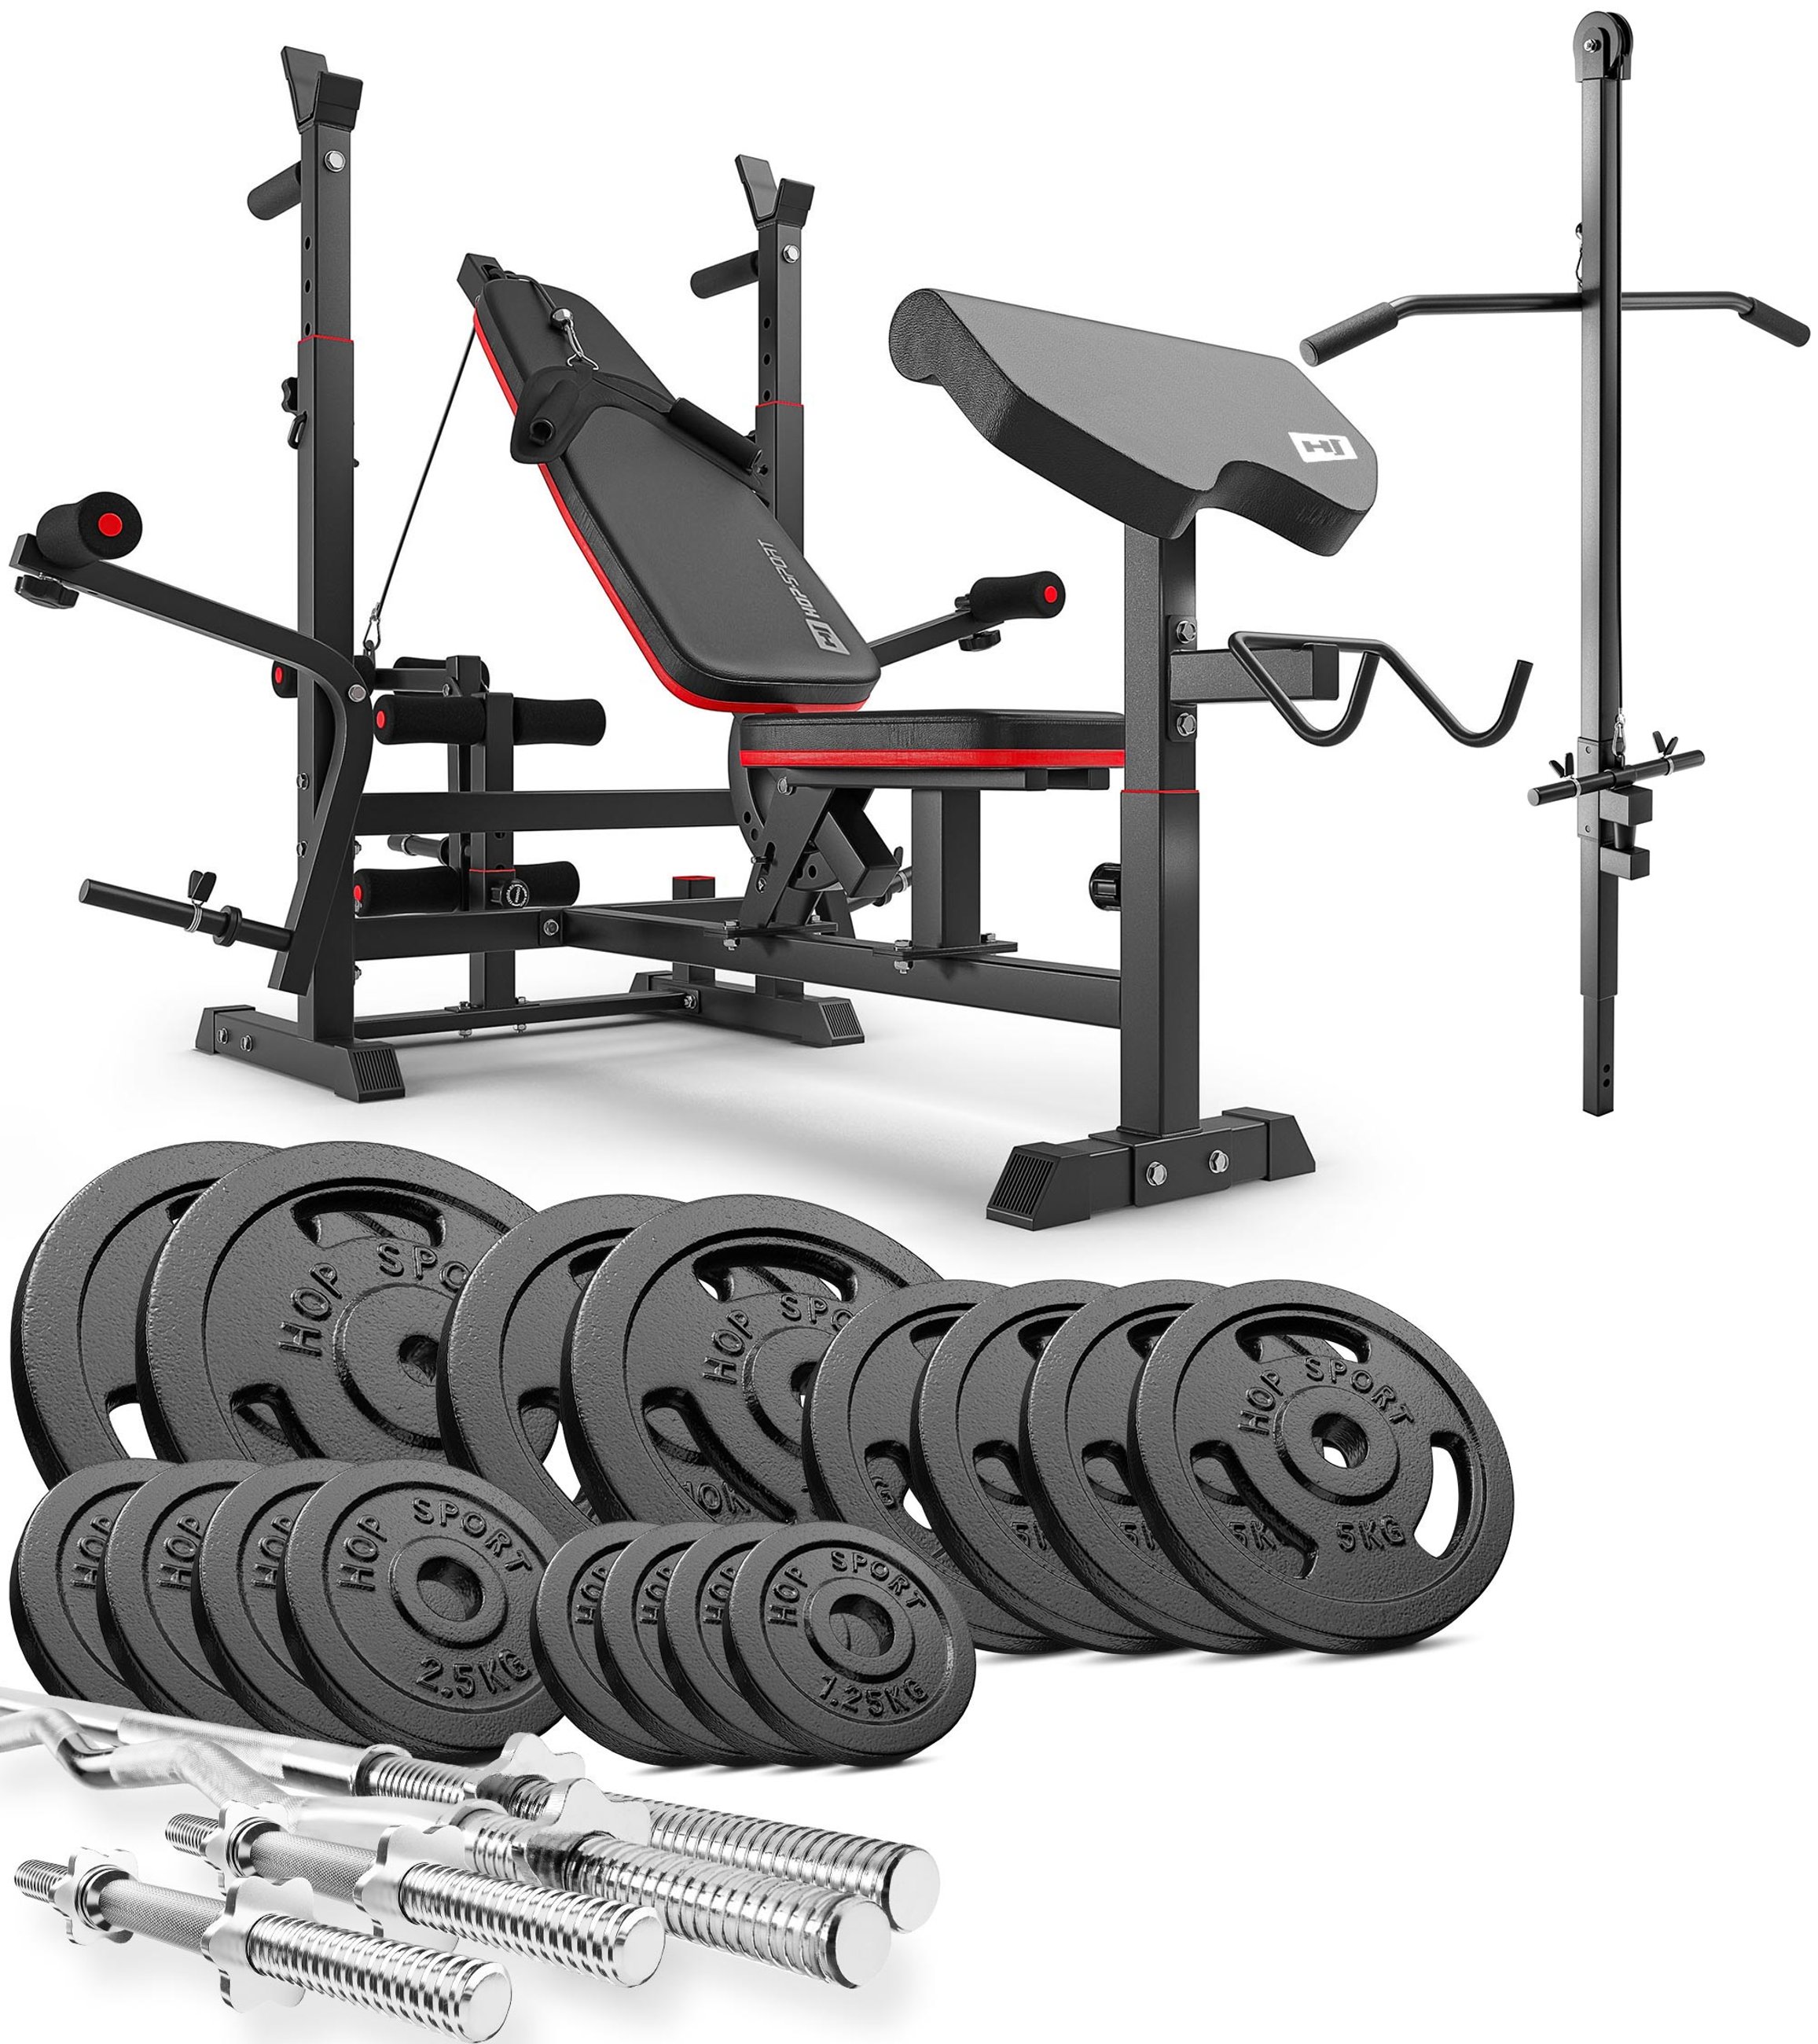 Strong 106 kg Cast Iron Barbell Set with HS-1075 Weight Bench